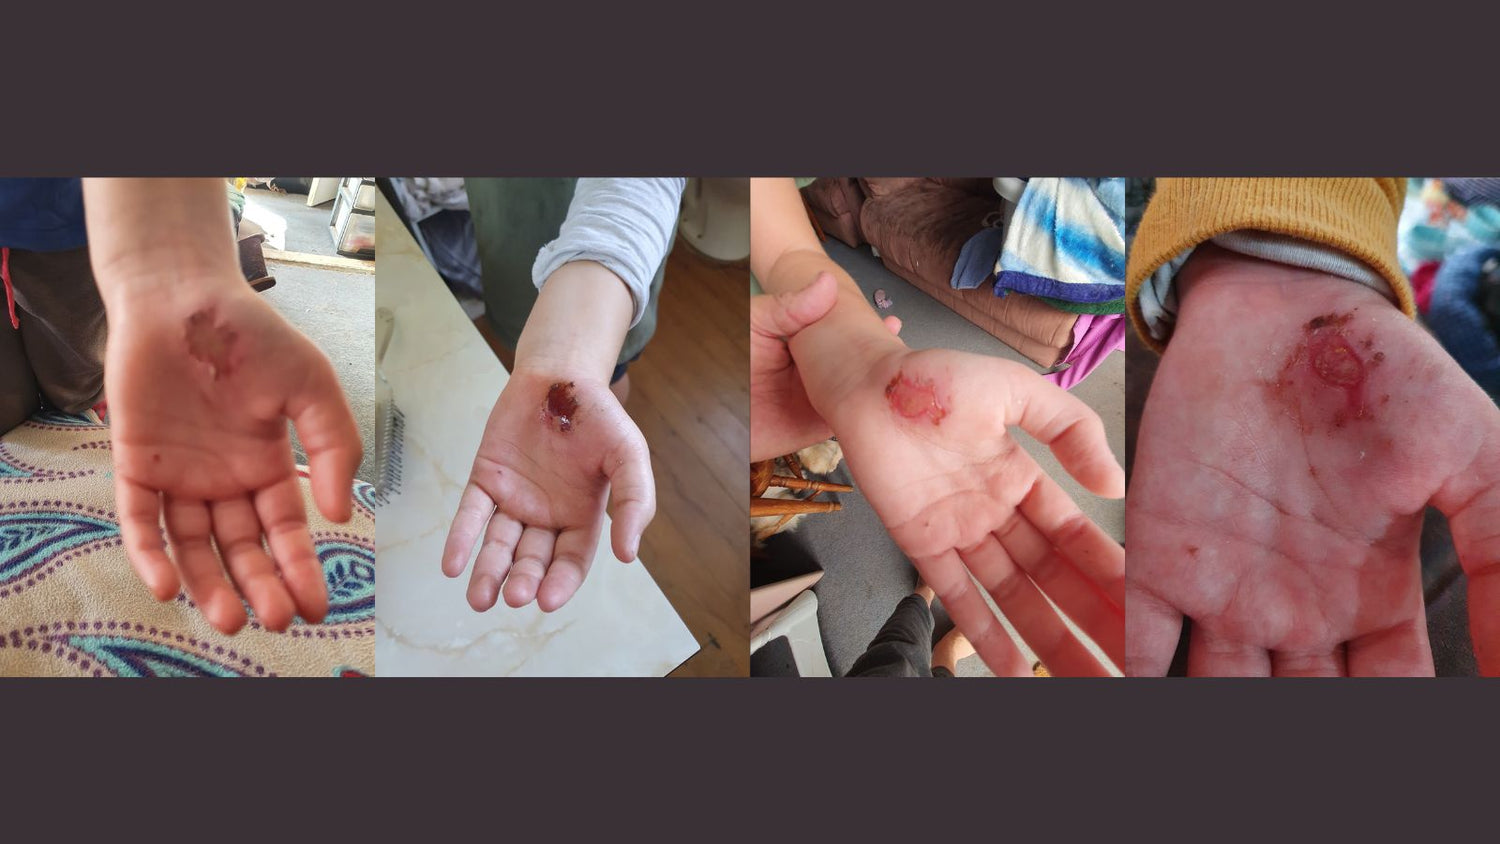 Progress of healing on Wound on Childs Hand